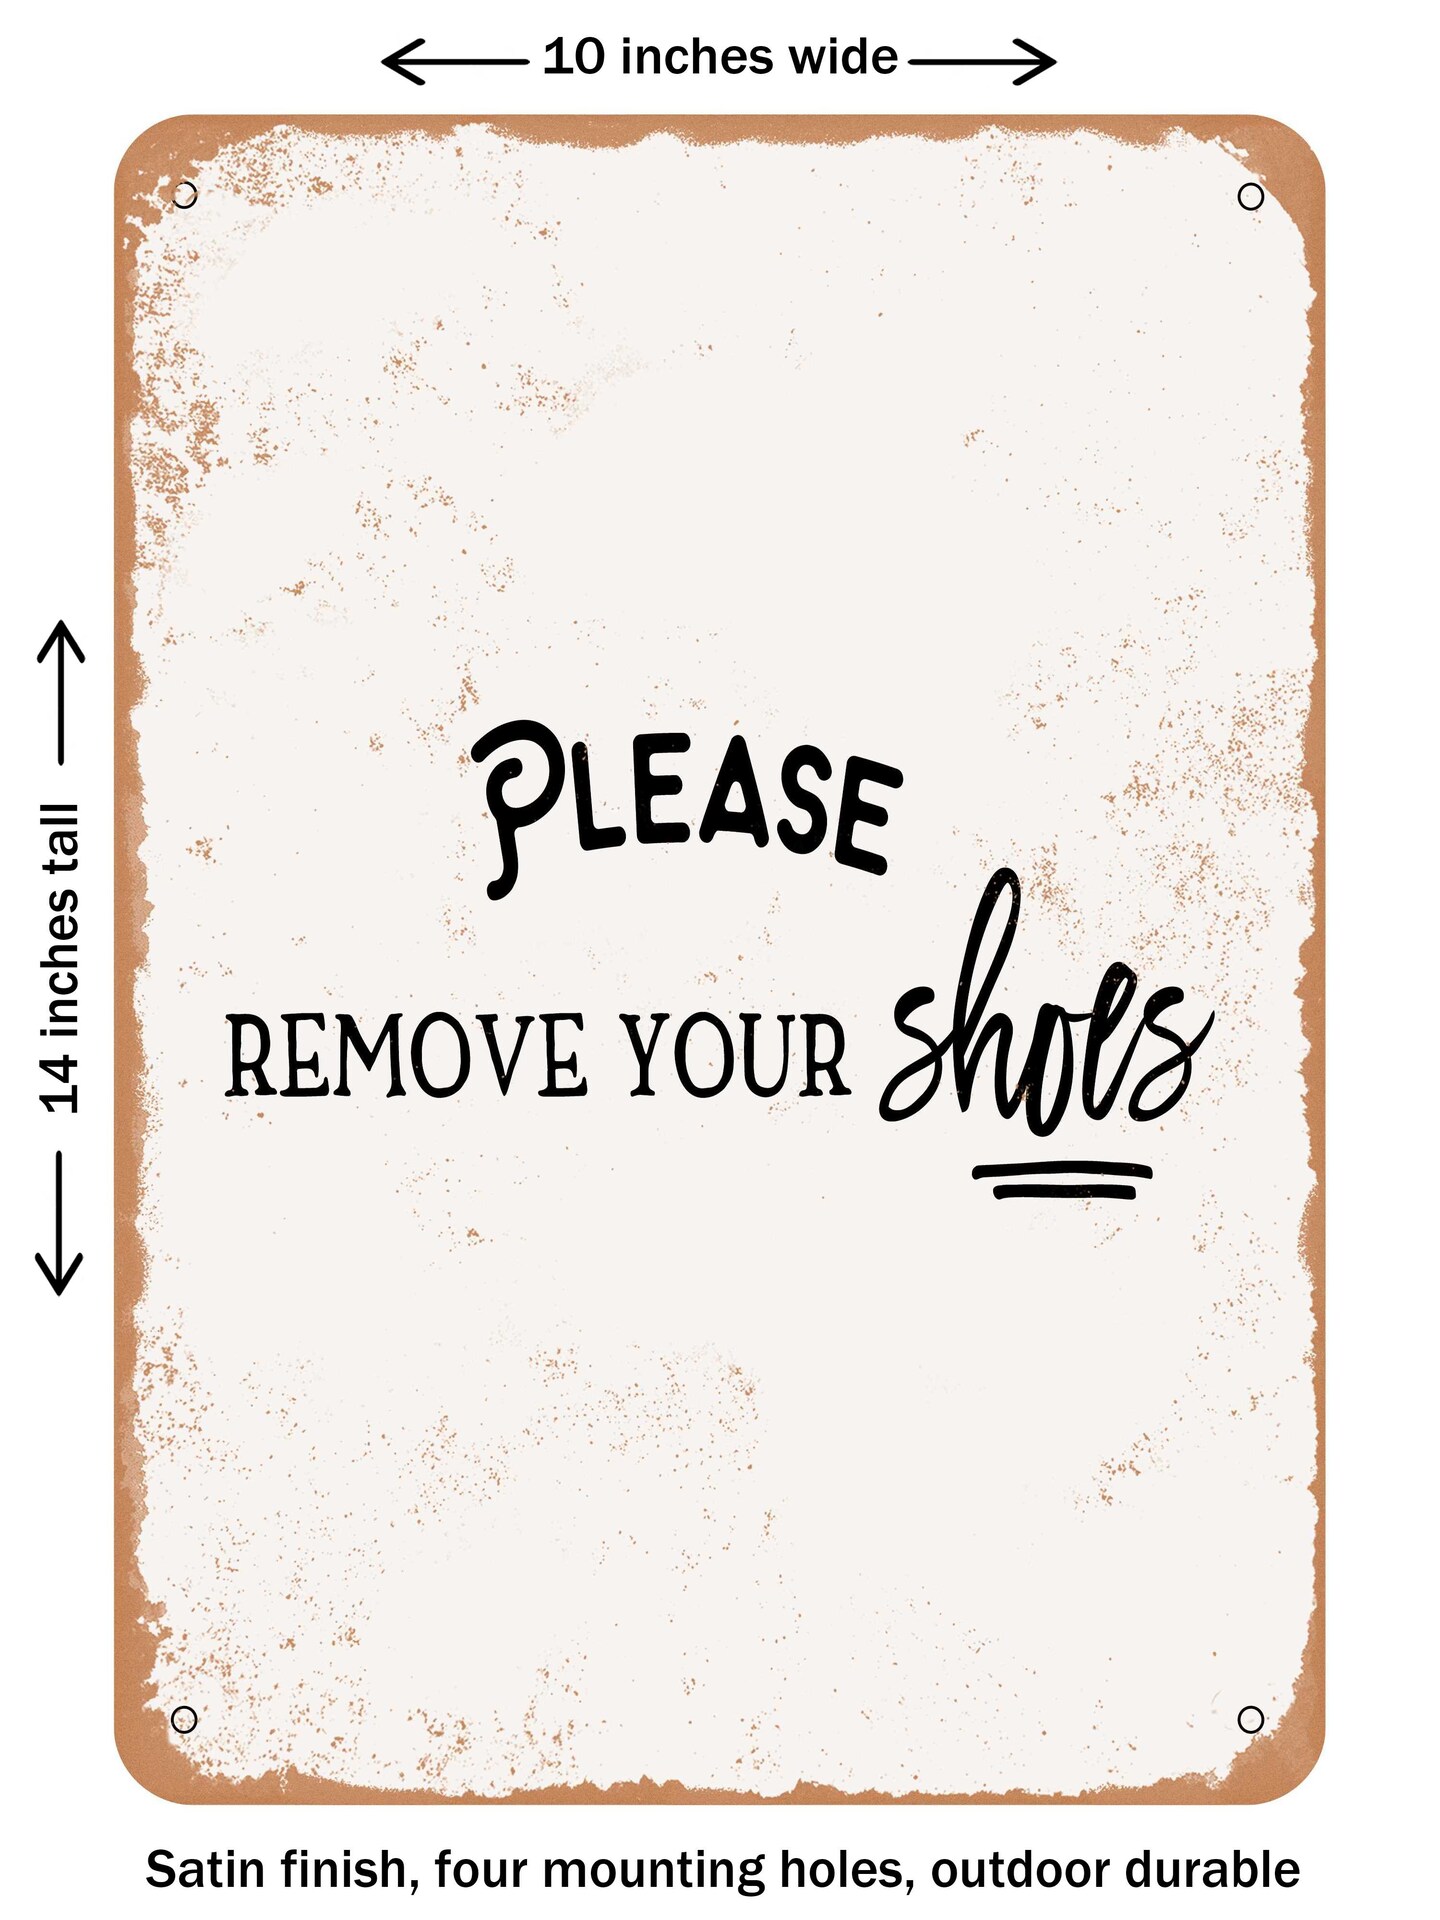 DECORATIVE METAL SIGN - Please Remove Your Shoes - 2  - Vintage Rusty Look